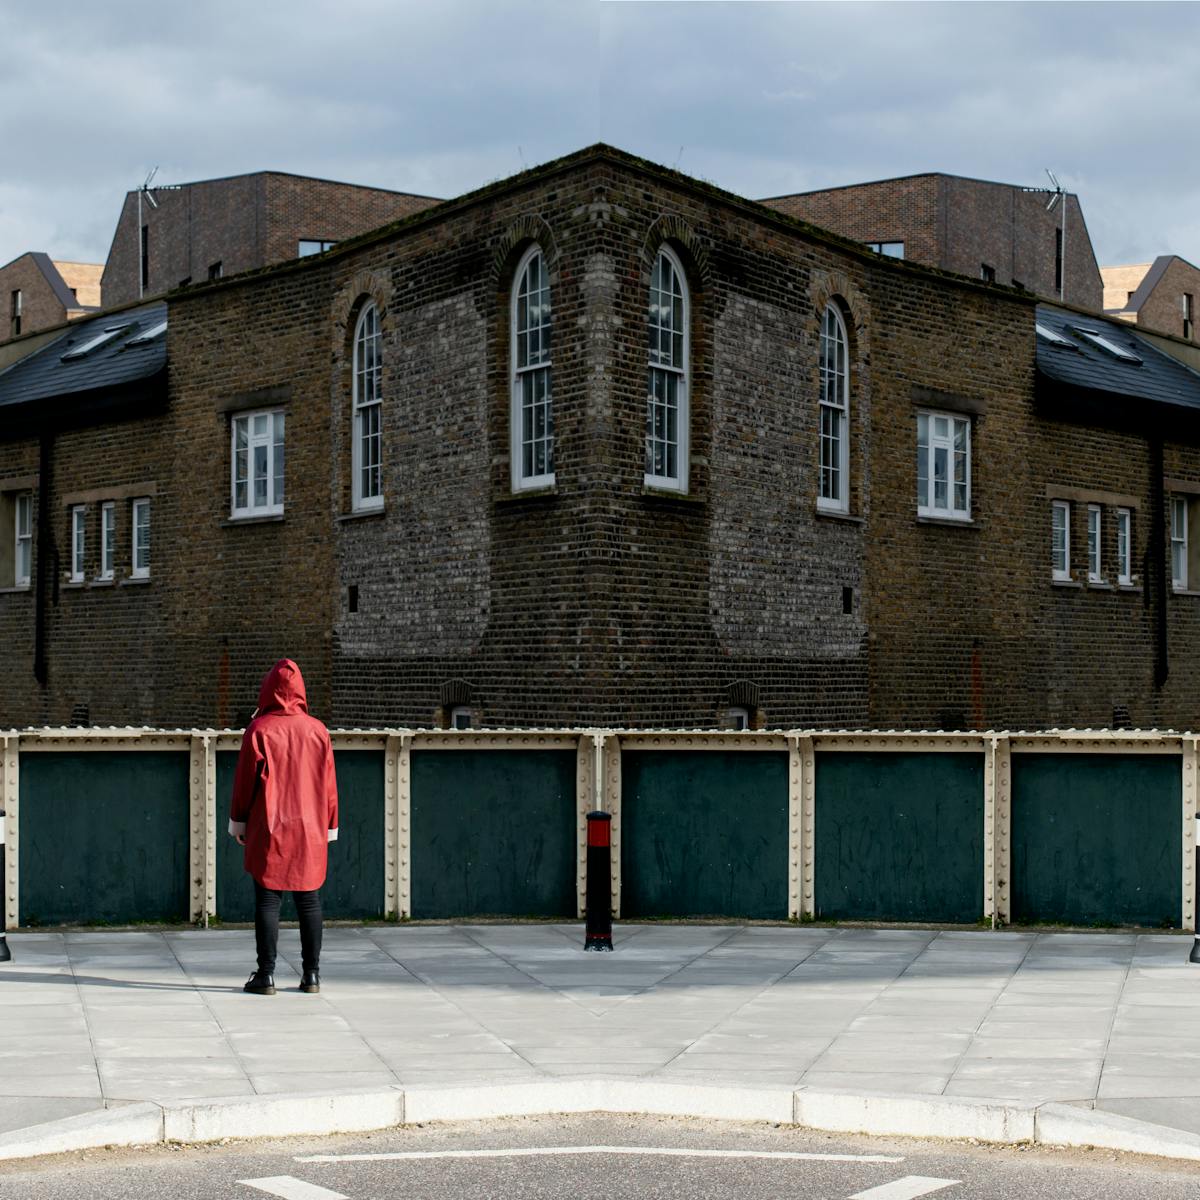 Photographic panorama showing a street scene with part of a road, a pavement, the handrail of a bridge and in the distance industrial brick buildings. The panorama is mirrored down its vertical centre line except that a small human figure in a red coat standing on the pavement looking away from the camera appears in the left half, but not in the right half.